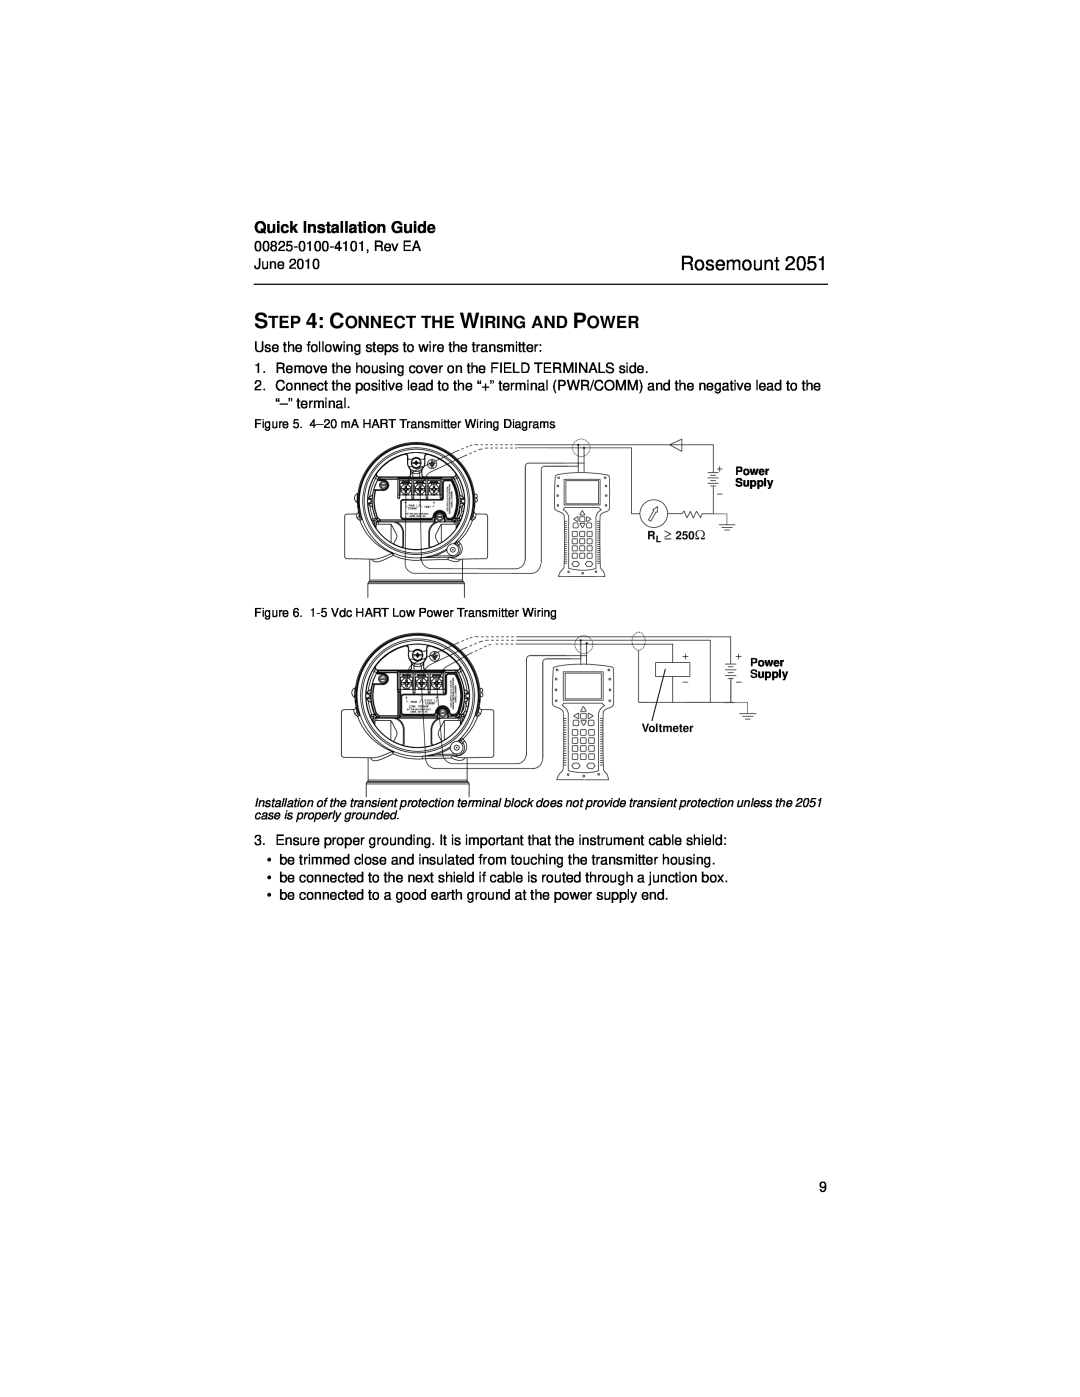 Emerson Process Management 2051CF manual Rosemount, Connect The Wiring And Power, Quick Installation Guide 